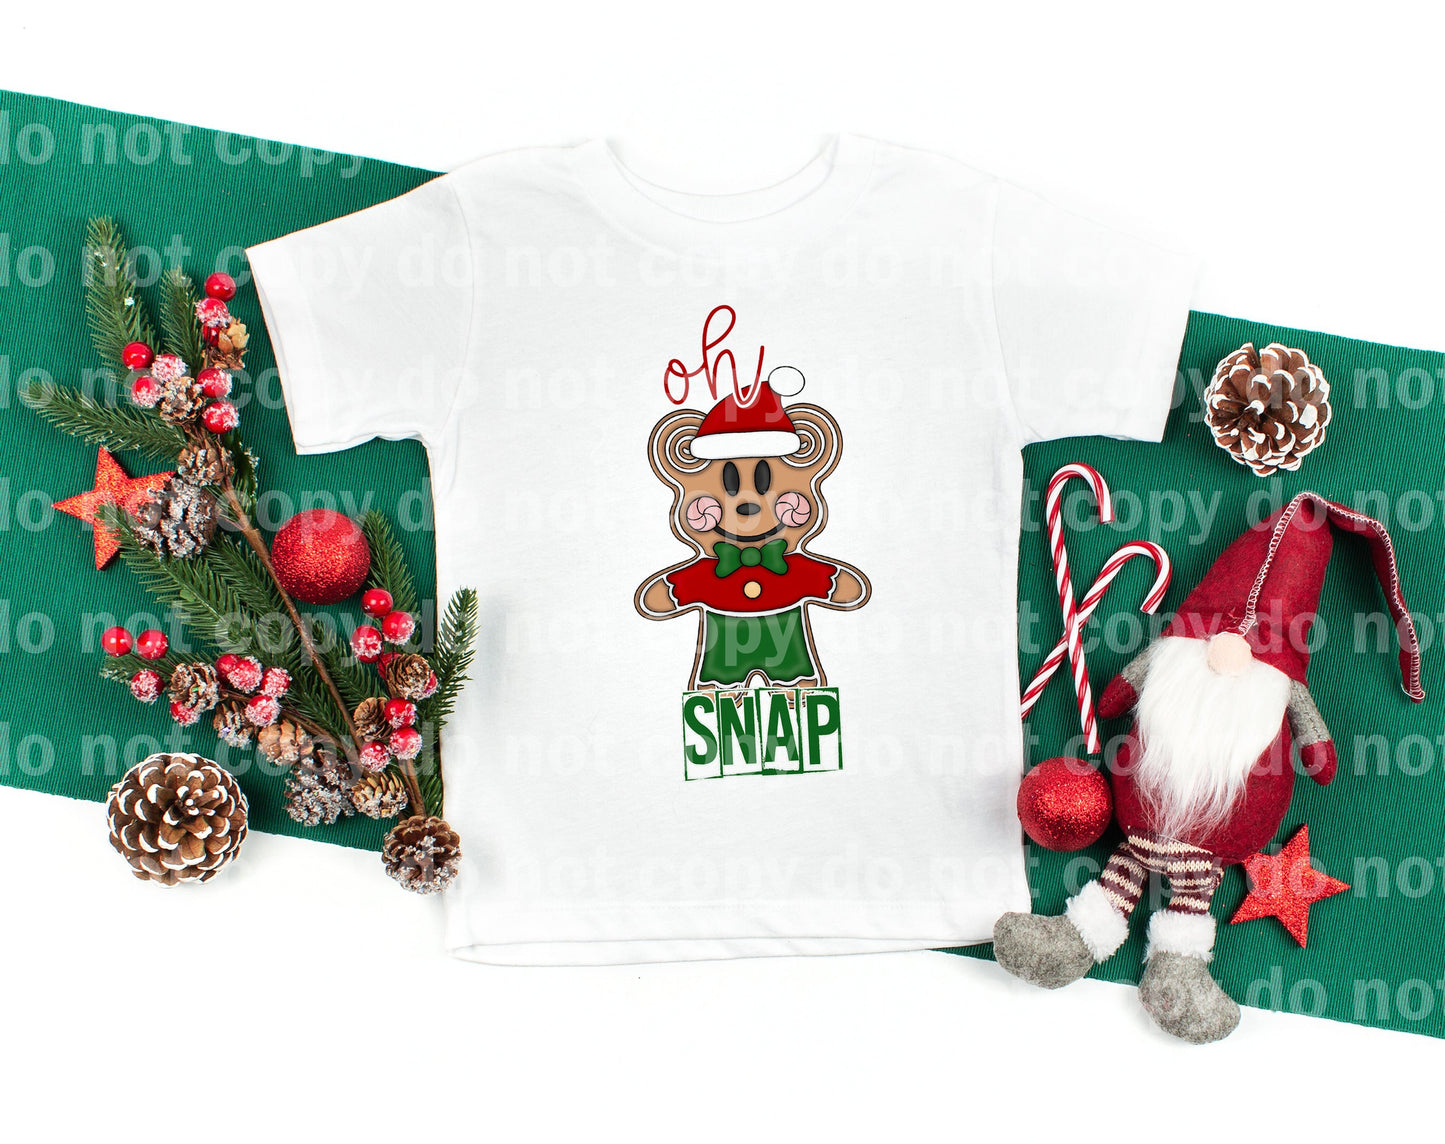 Oh Snap Gingerbread Dream Print or Sublimation Print